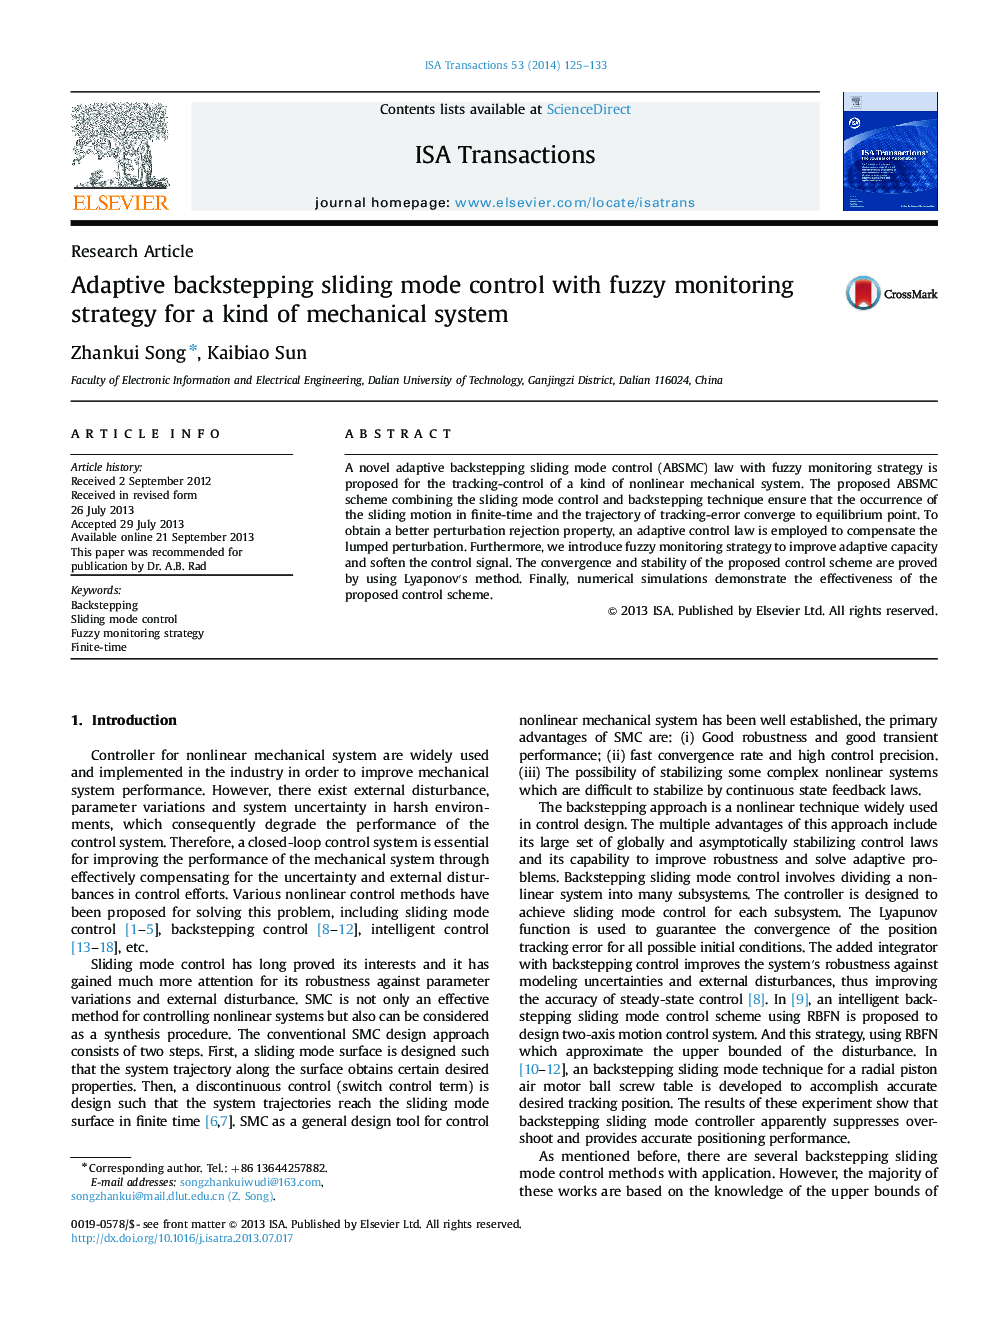 Research ArticleAdaptive backstepping sliding mode control with fuzzy monitoring strategy for a kind of mechanical system